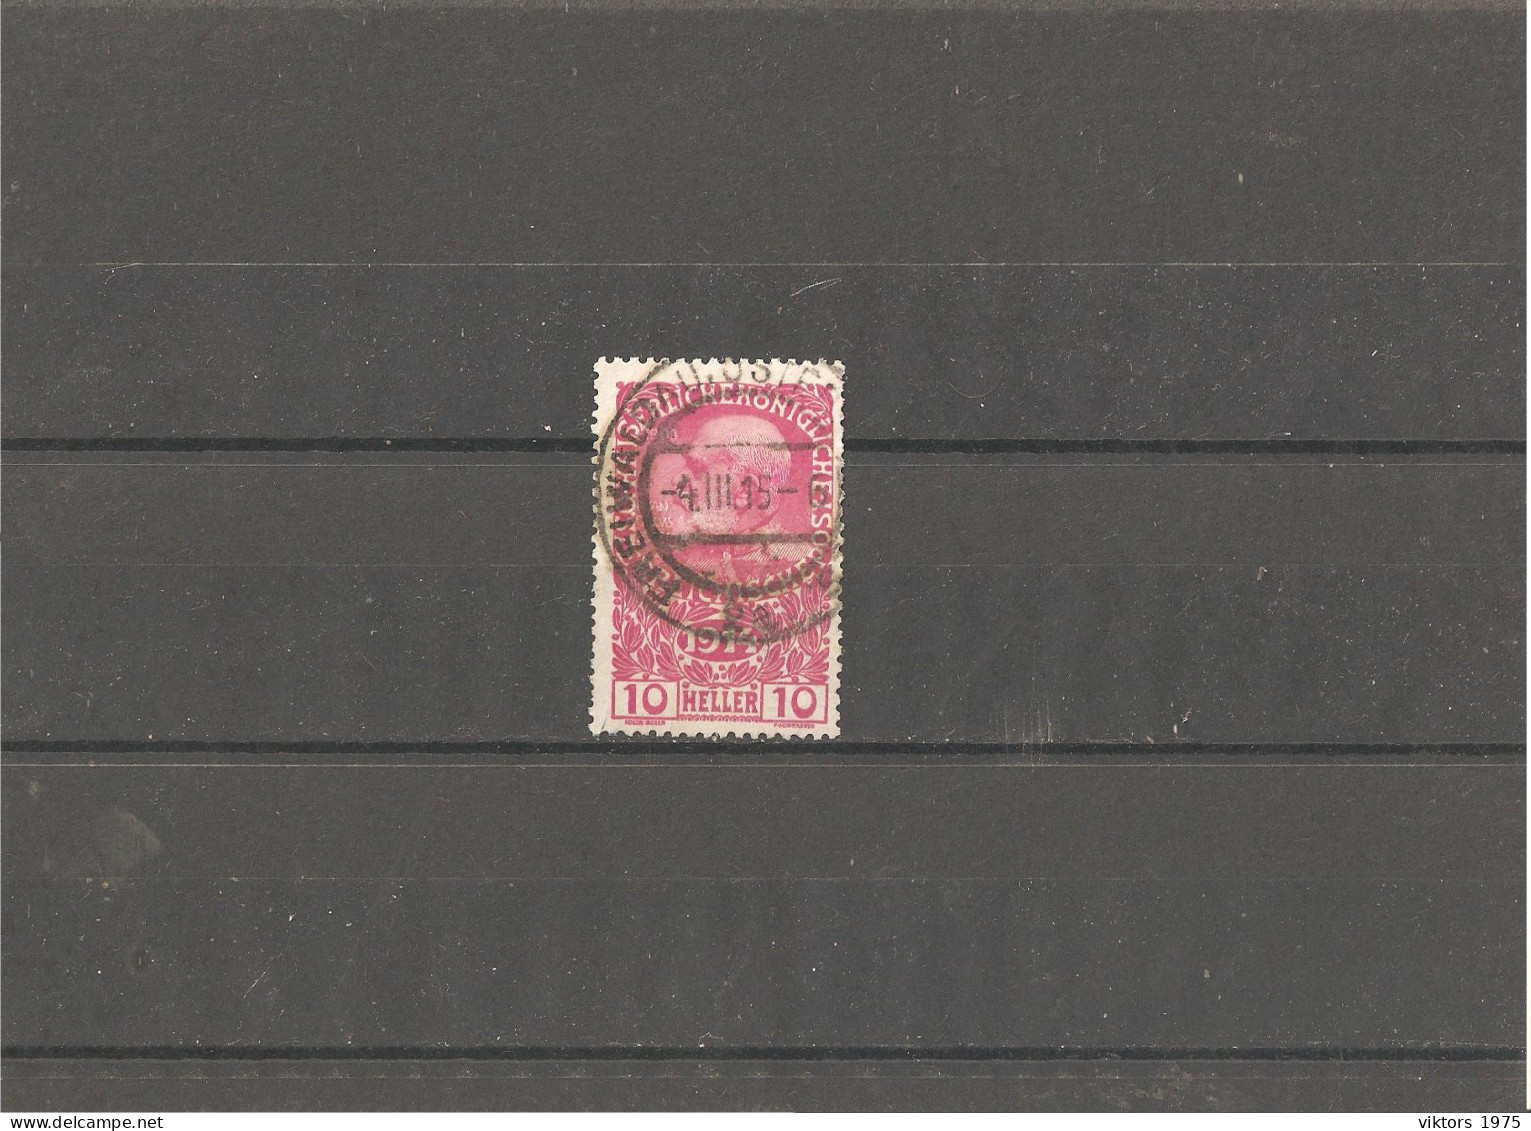 Used Stamp Nr.179 In MICHEL Catalog - Used Stamps